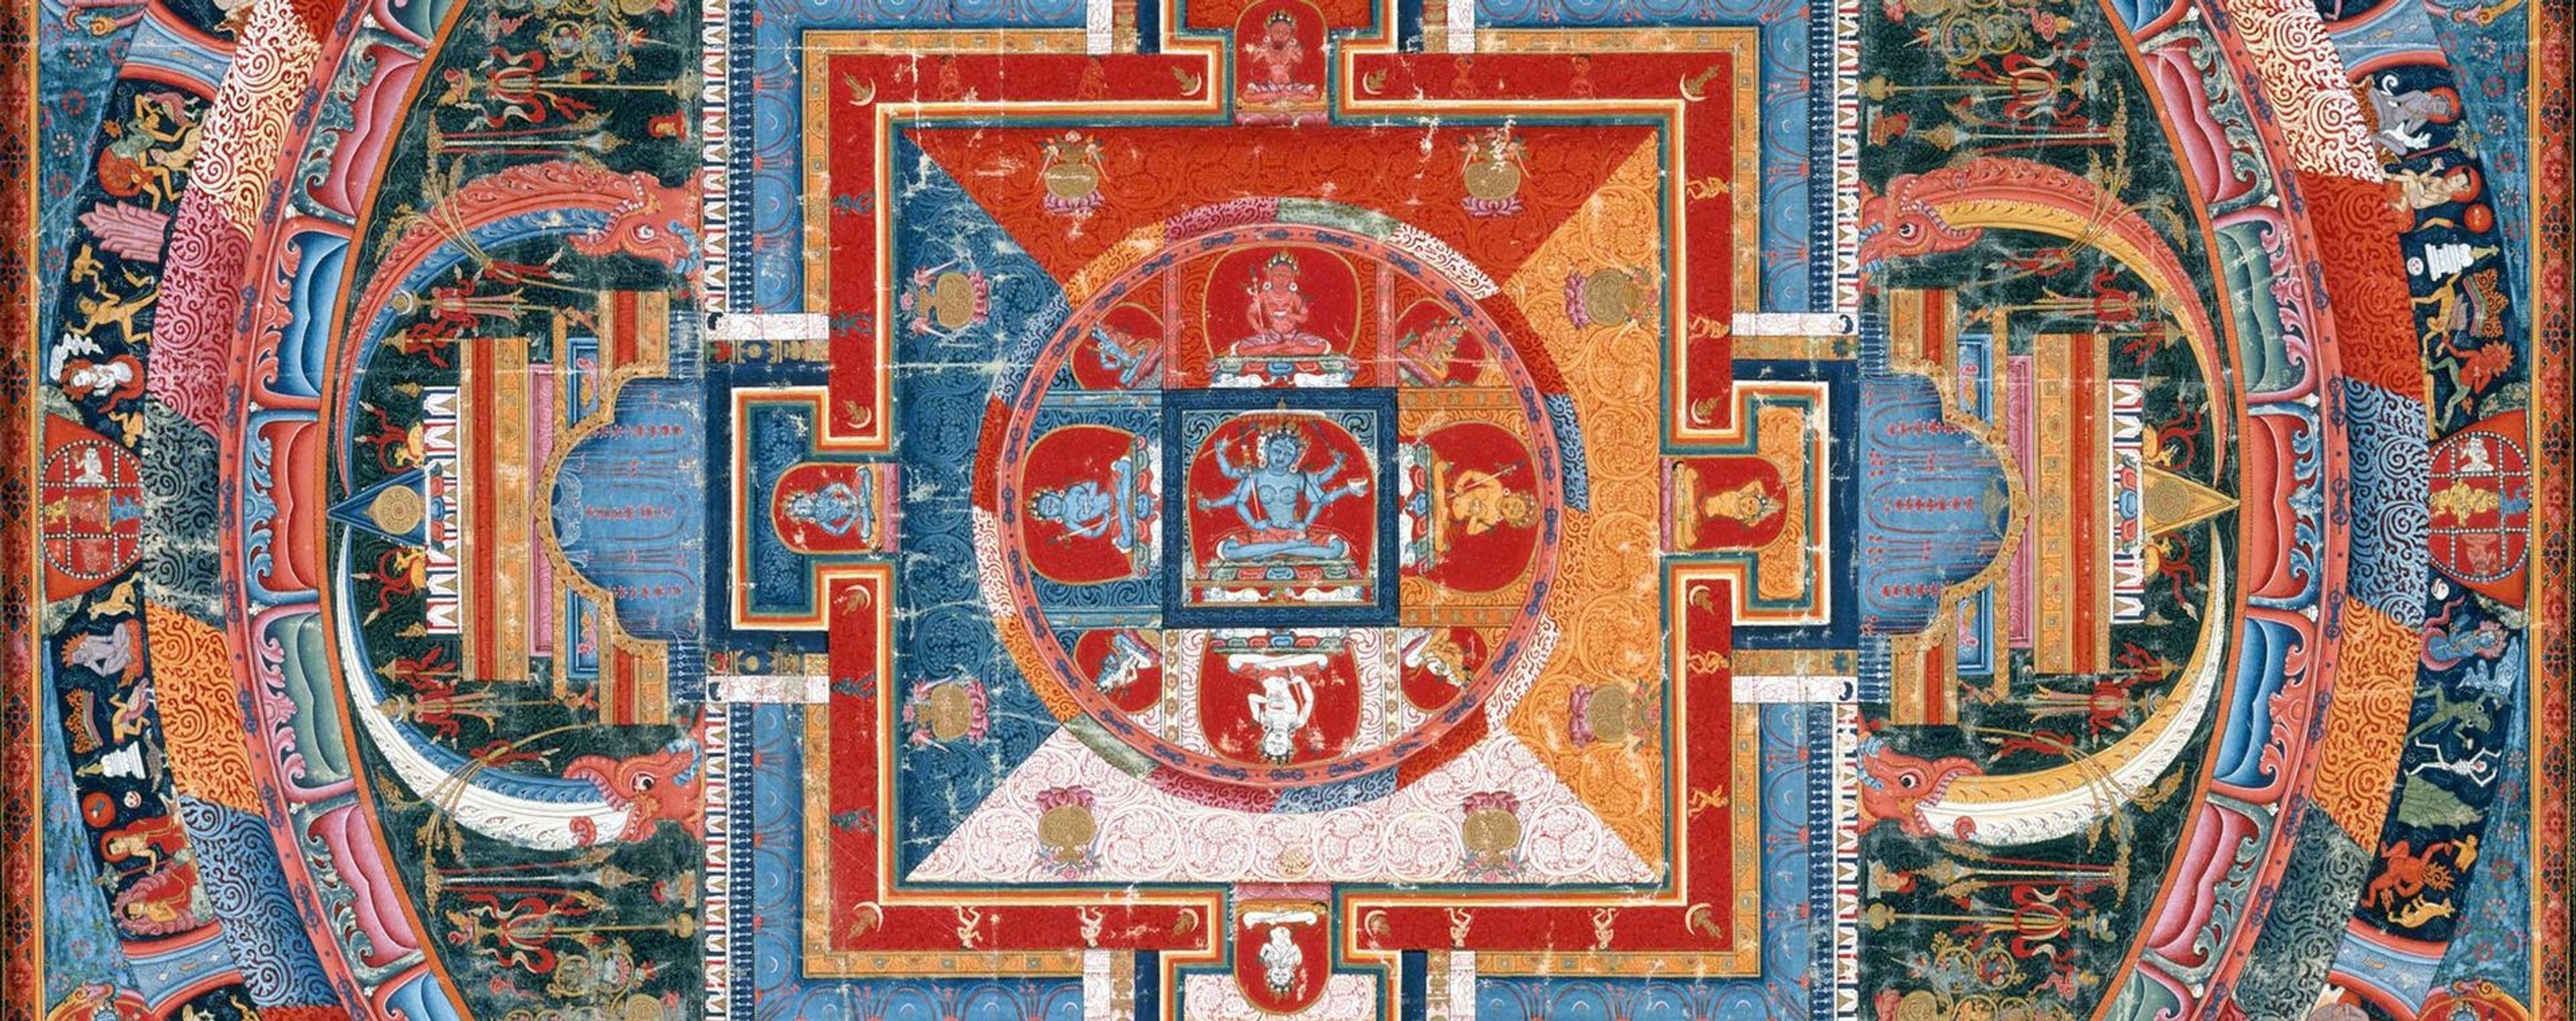 Detail of a buddhist mandala, featuring a many-limbed blue deity at the center and surrounded by other dancing figures in a circular pattern.